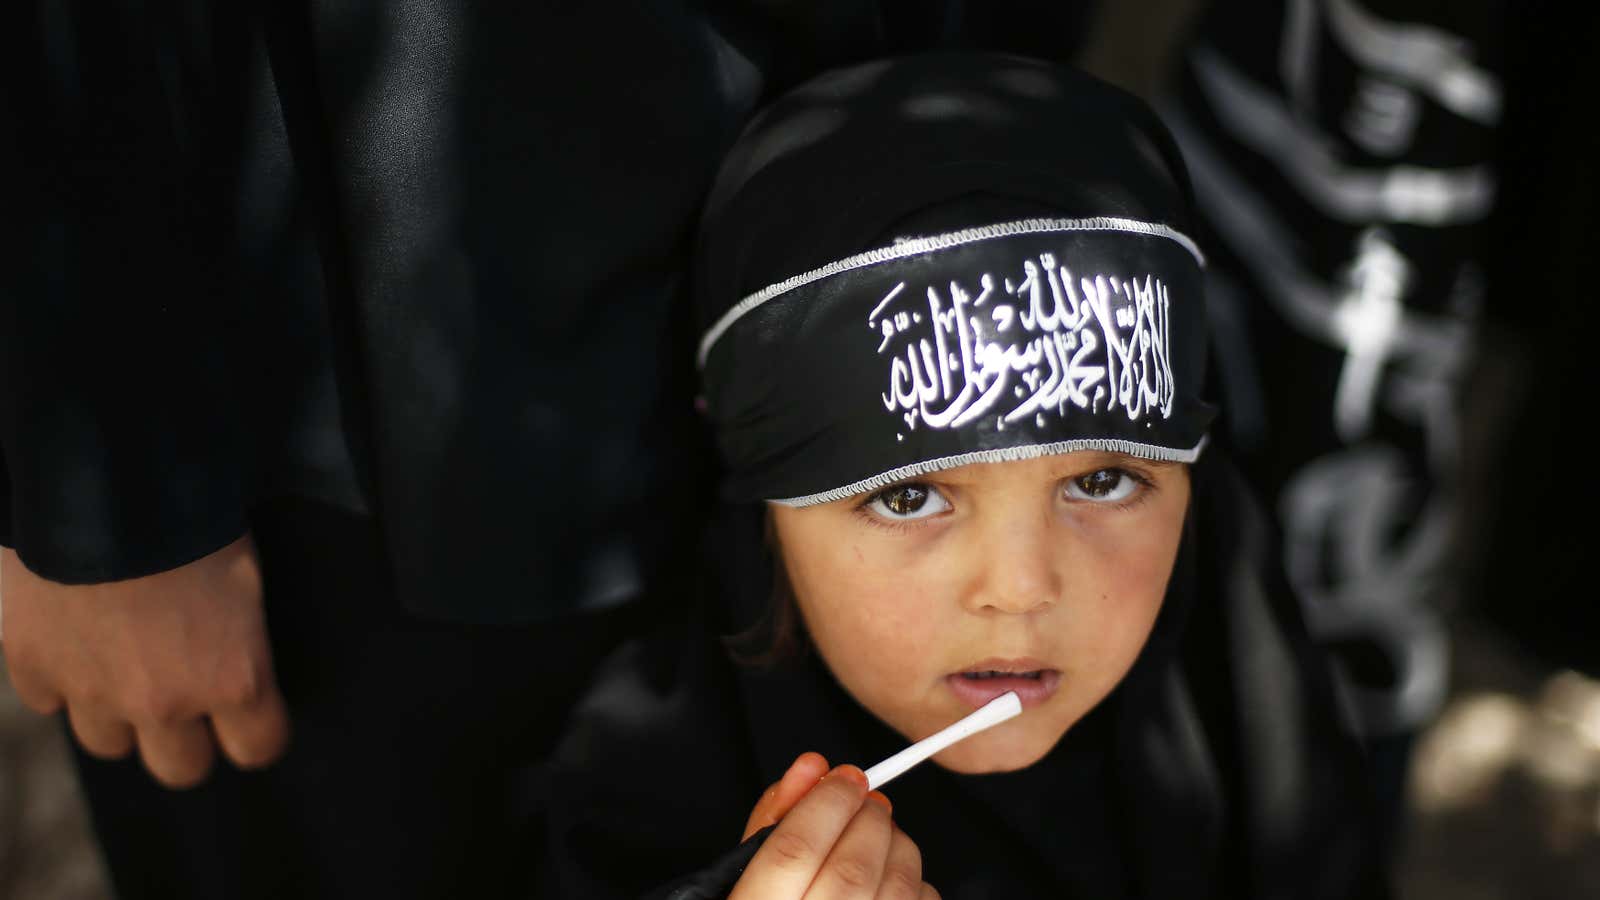 A Palestinian girl wearing the headband of Hizb ut-Tahrir takes part in a rally calling for Khilafah, or Islamic rule, in Gaza City, June 2013.